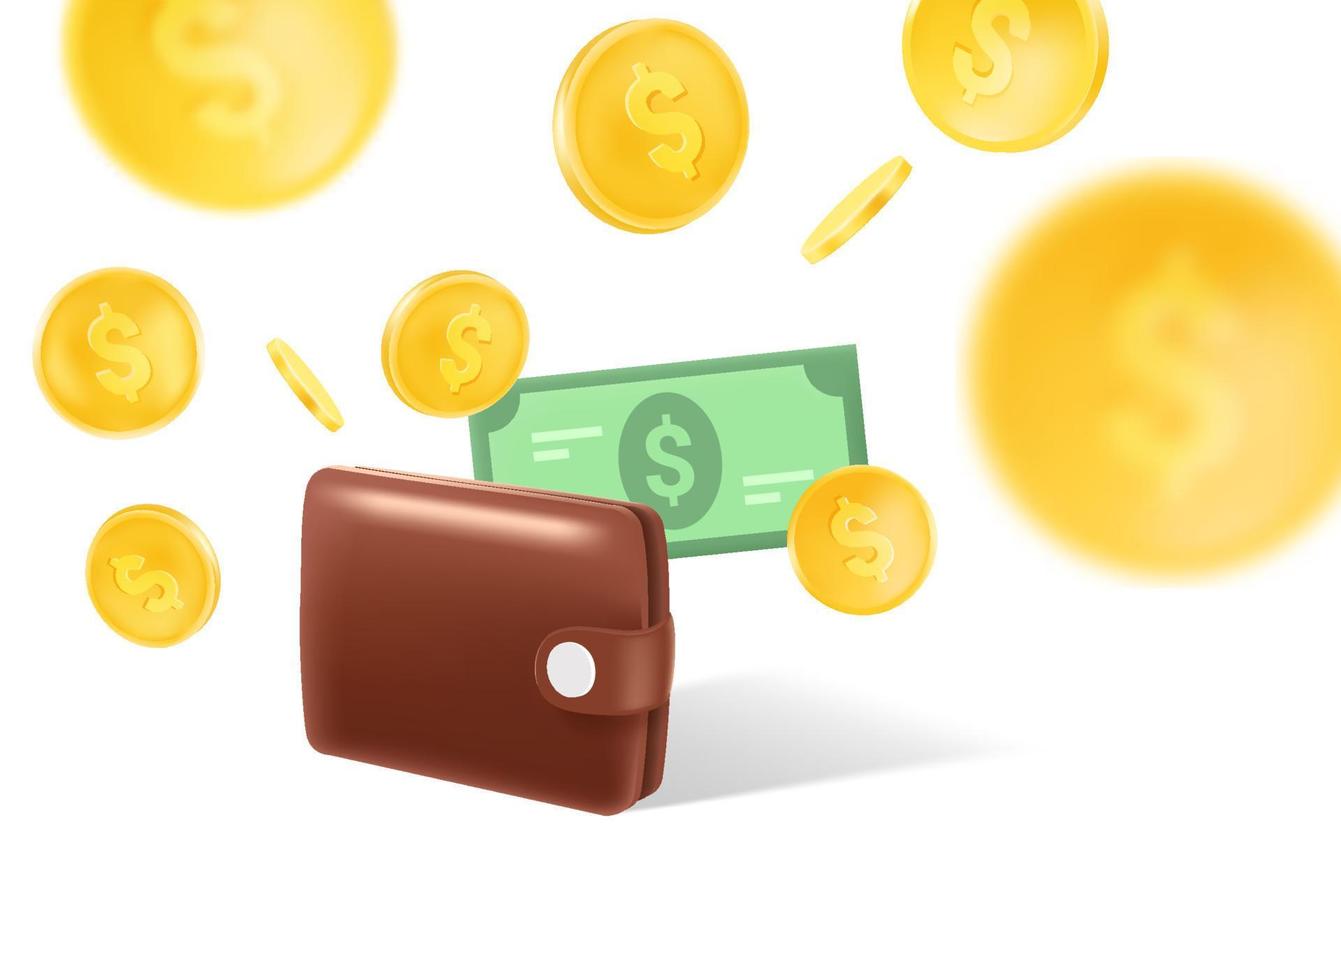 Wallet with golden coins, banknotes and credit card vector